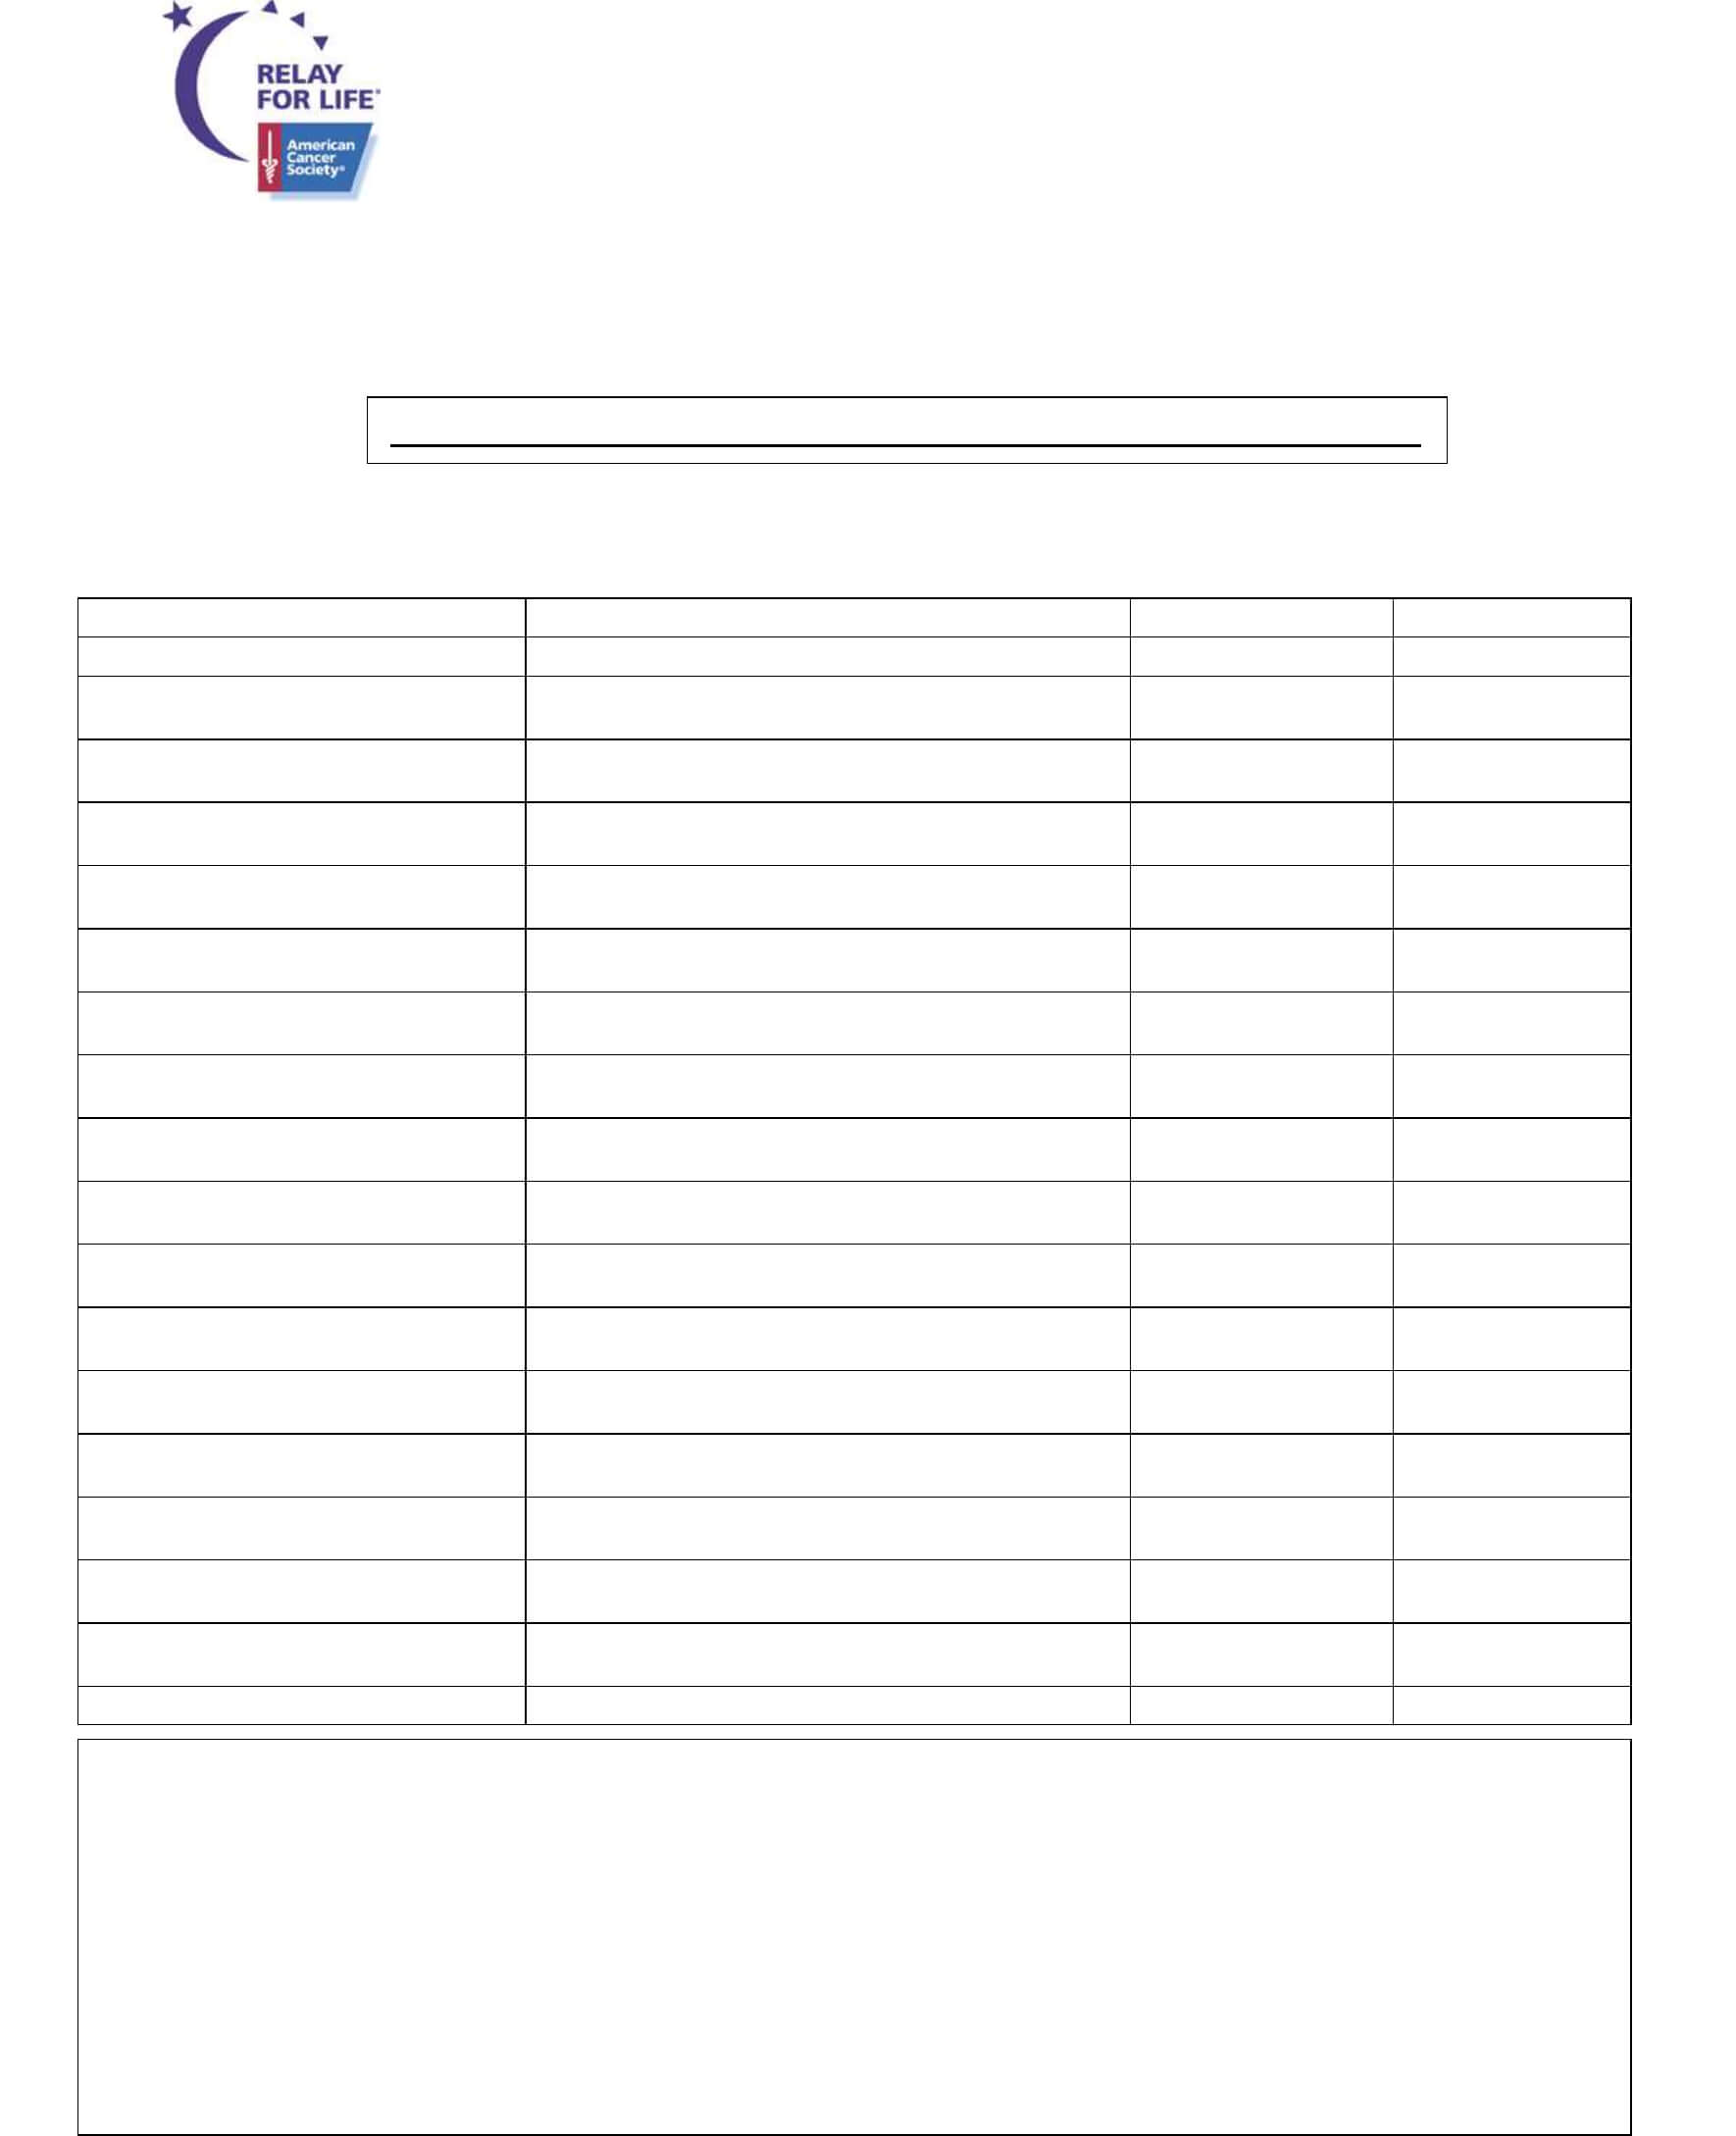 Relay For Life Donation Form – America Free Download With Regard To Blank Sponsorship Form Template